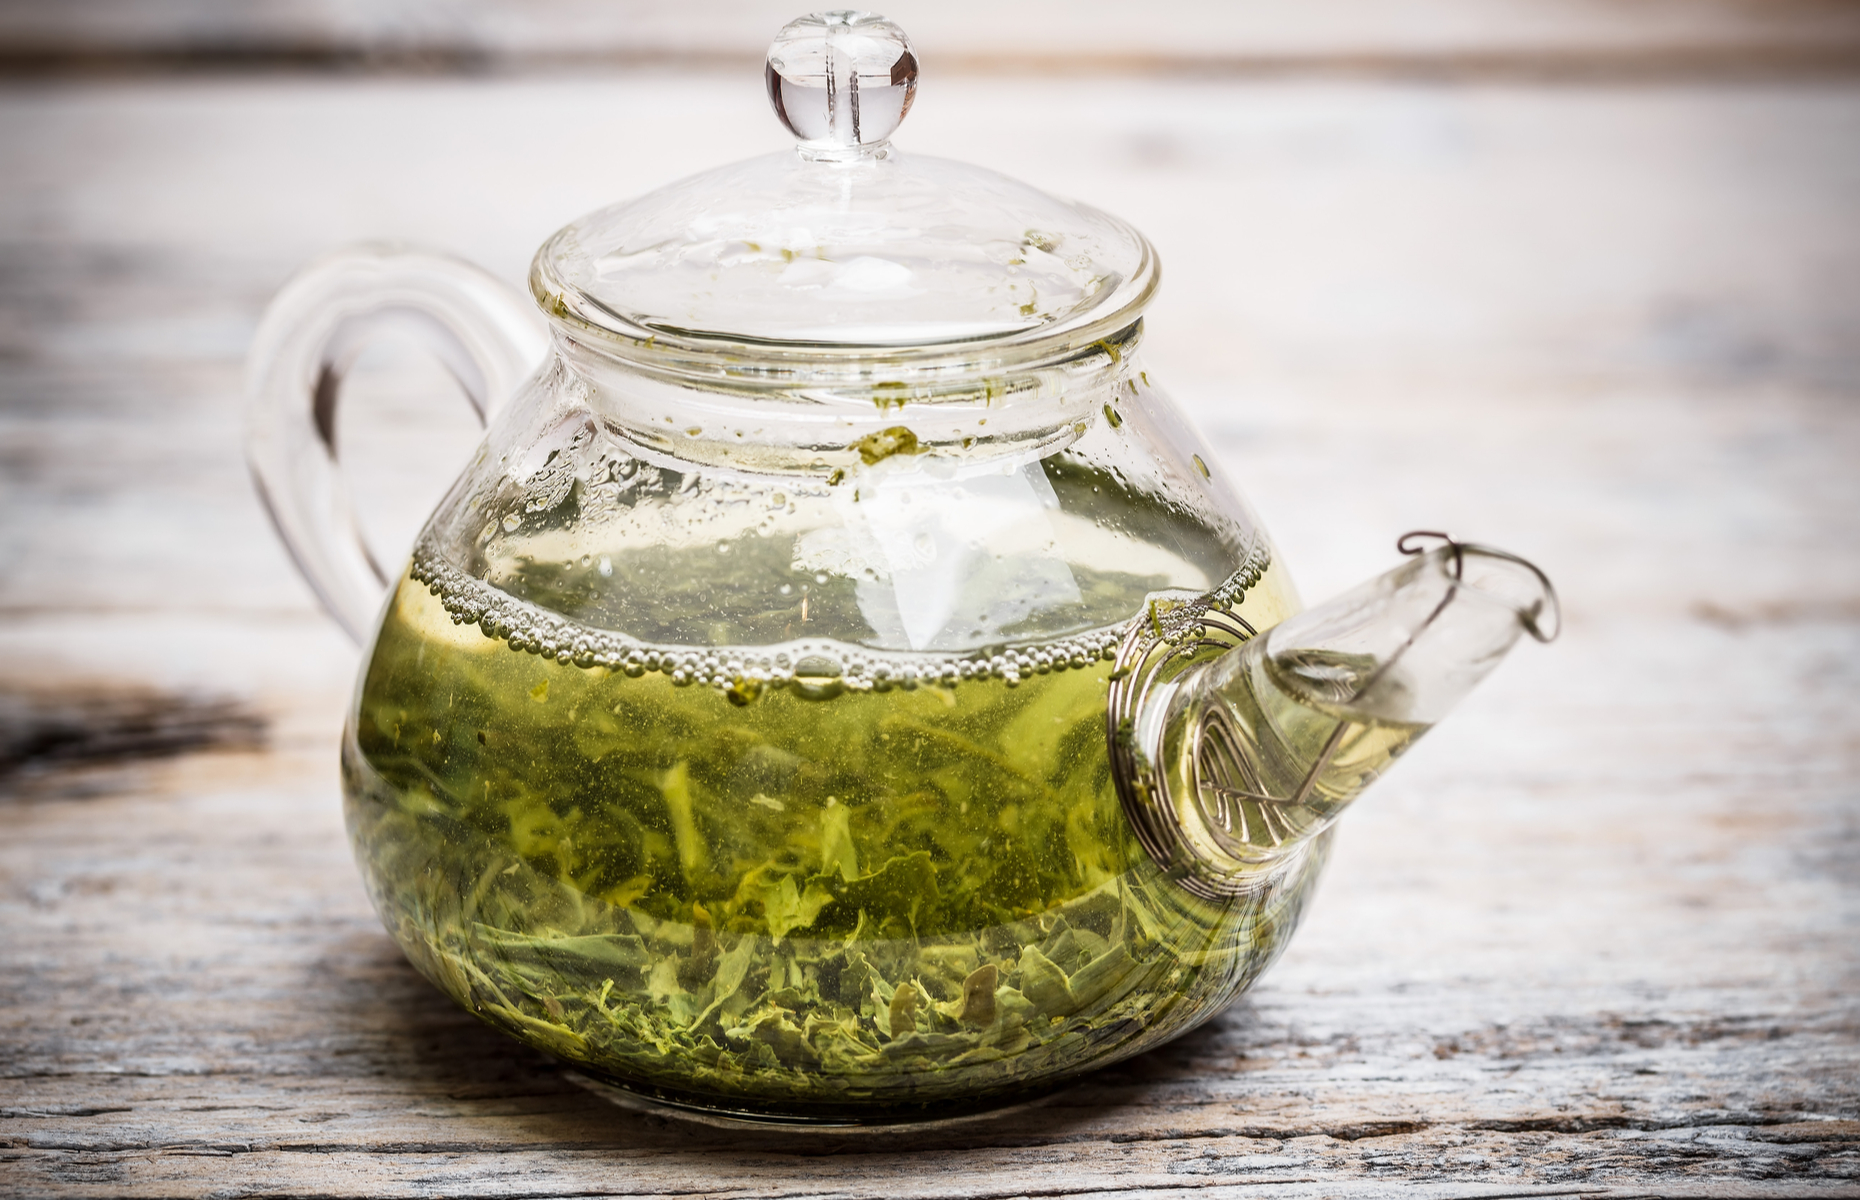 Loose leaves in glass teapot (Image: grafvision/Shutterstock)